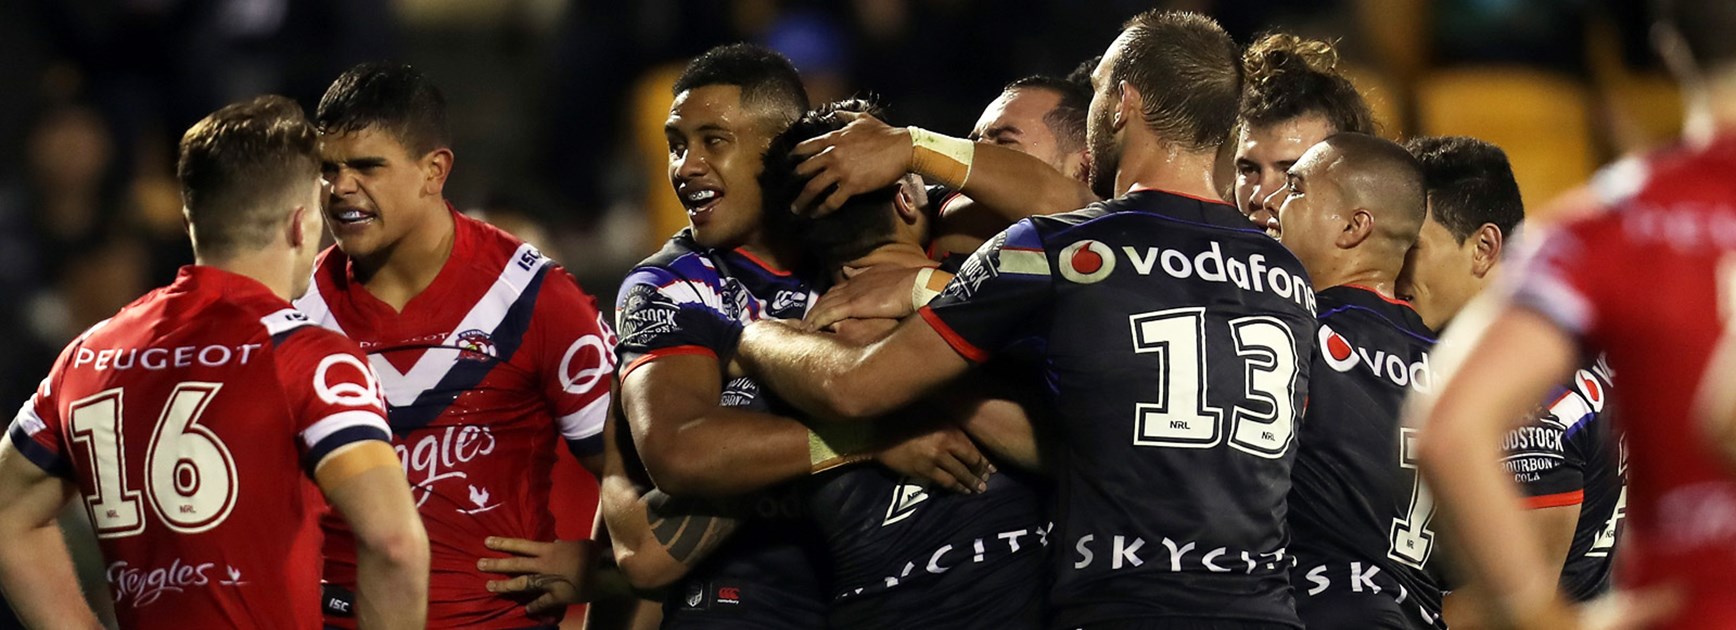 Warriors players celebrate during their Round 15 win over the Roosters.